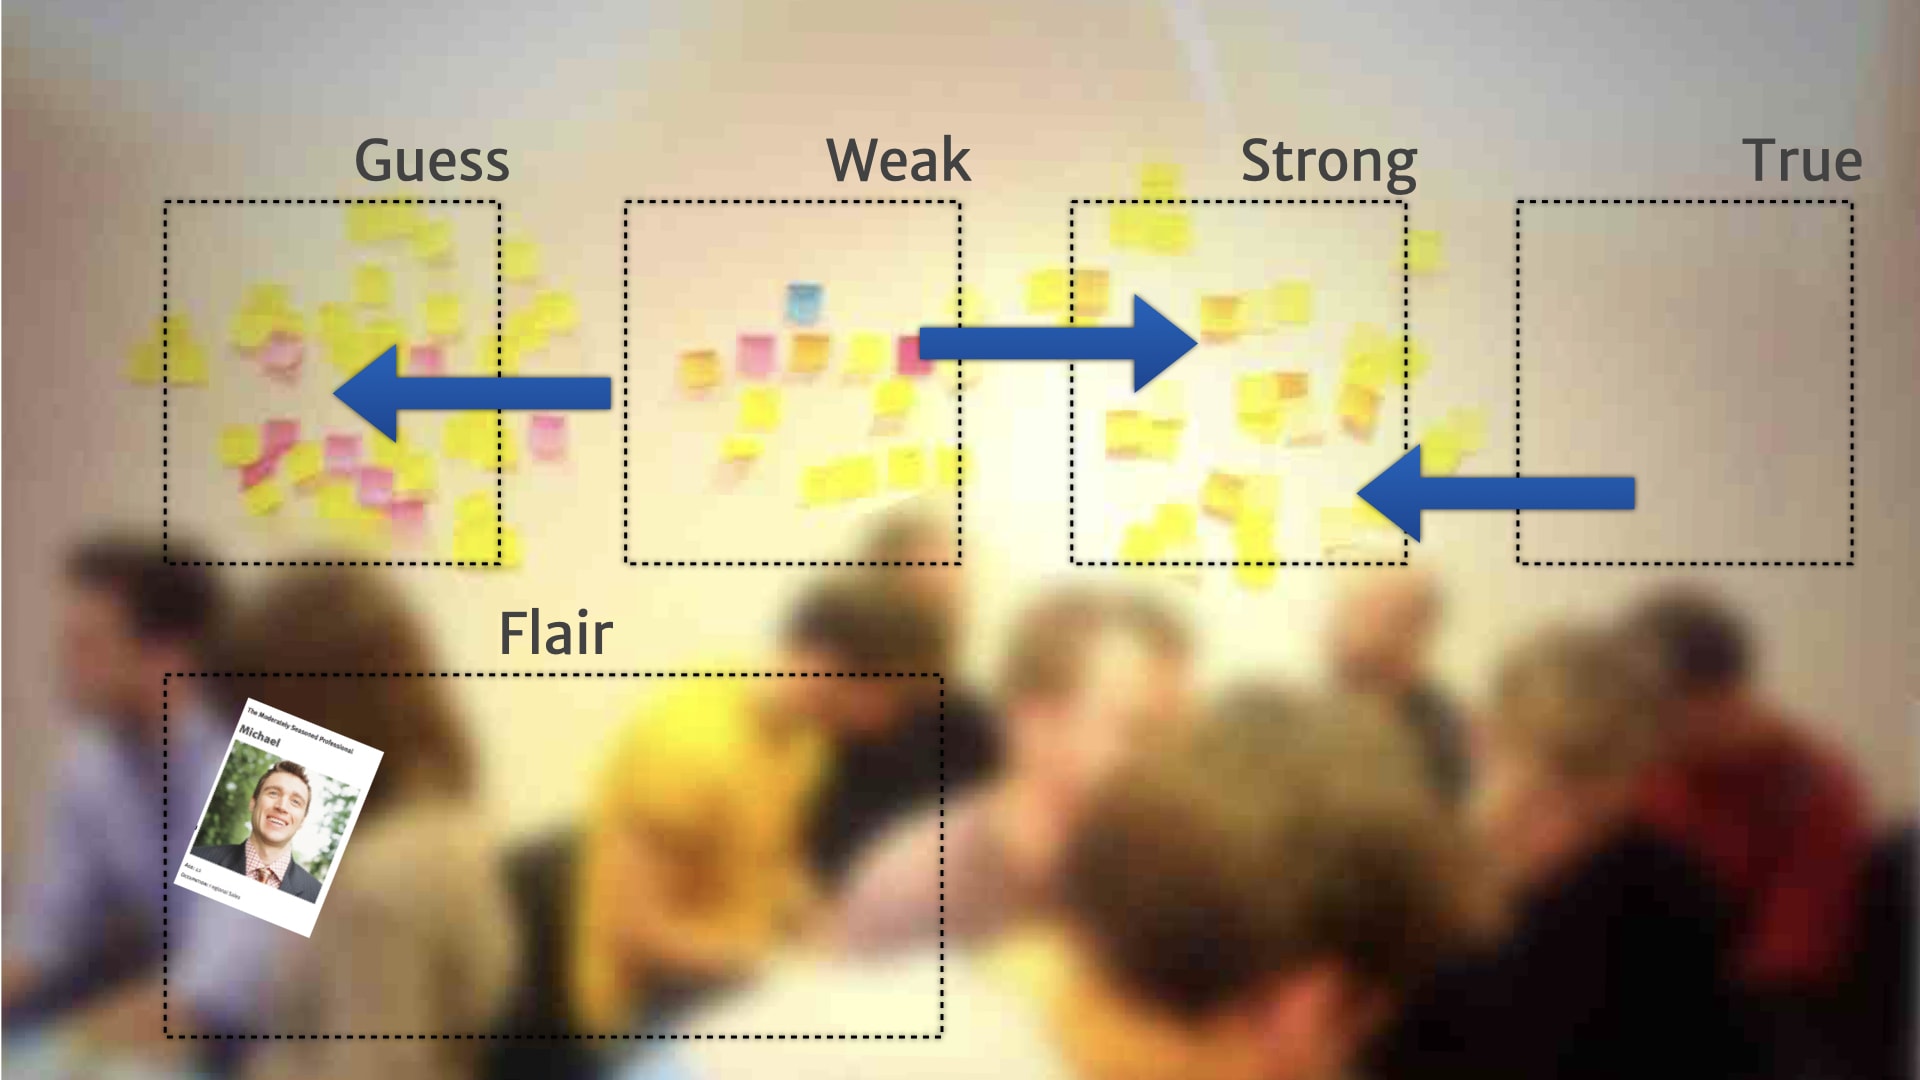 A picture of a wall of post-it notes divided into four categories running left to right (Guess, Weak, Strong, and True). A few medium length blue arrows illustrate occasional transitions between the sections.